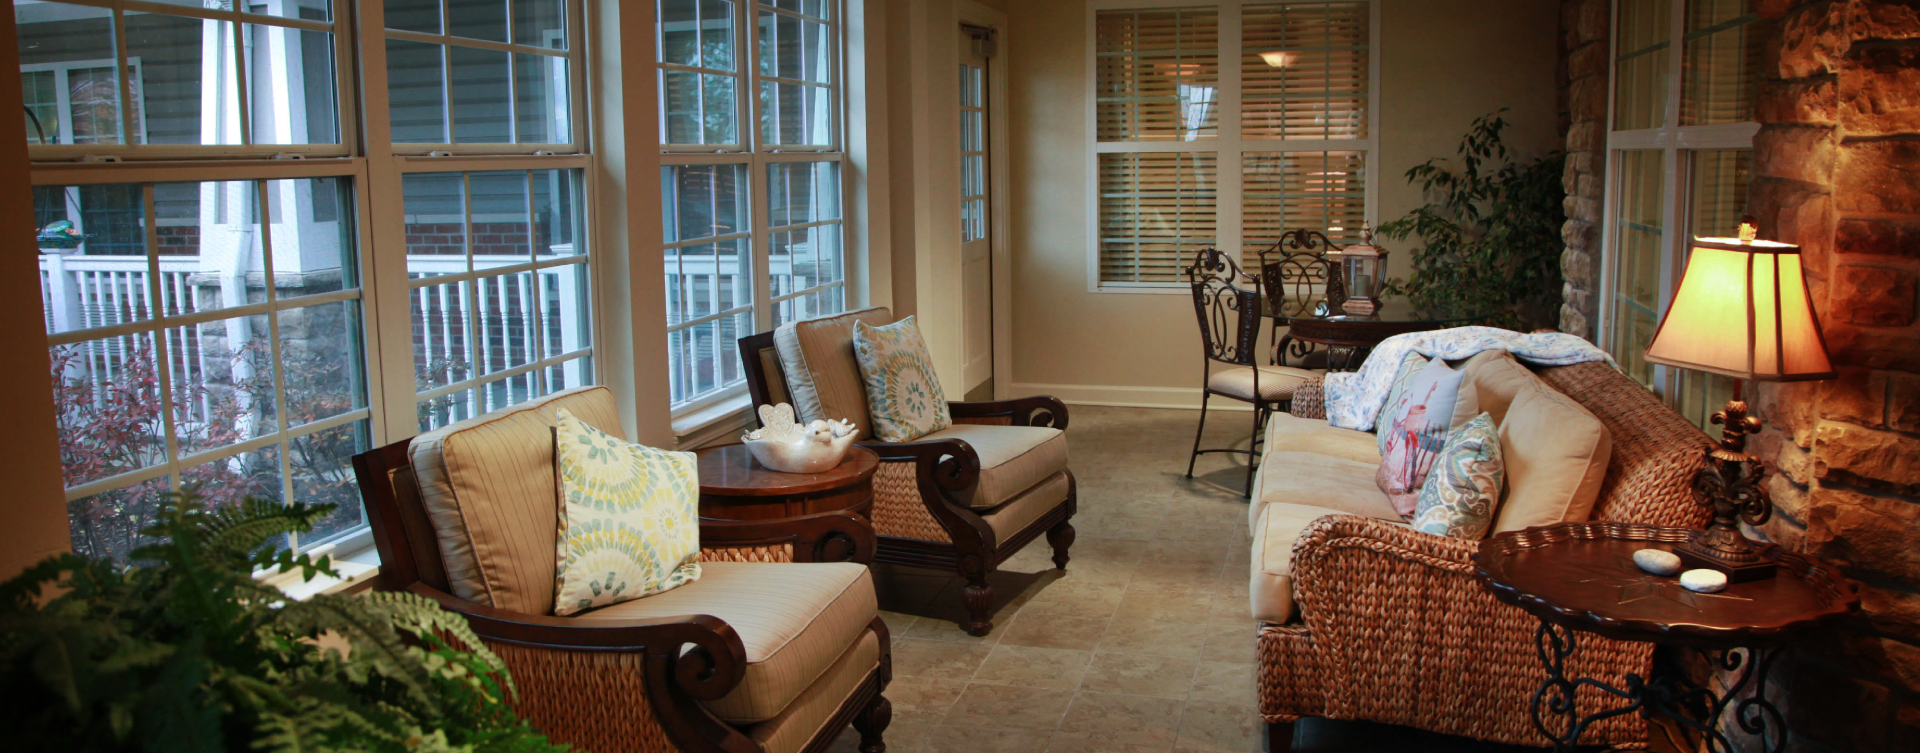 Relax in the warmth of the sunroom at Bickford of St. Charles